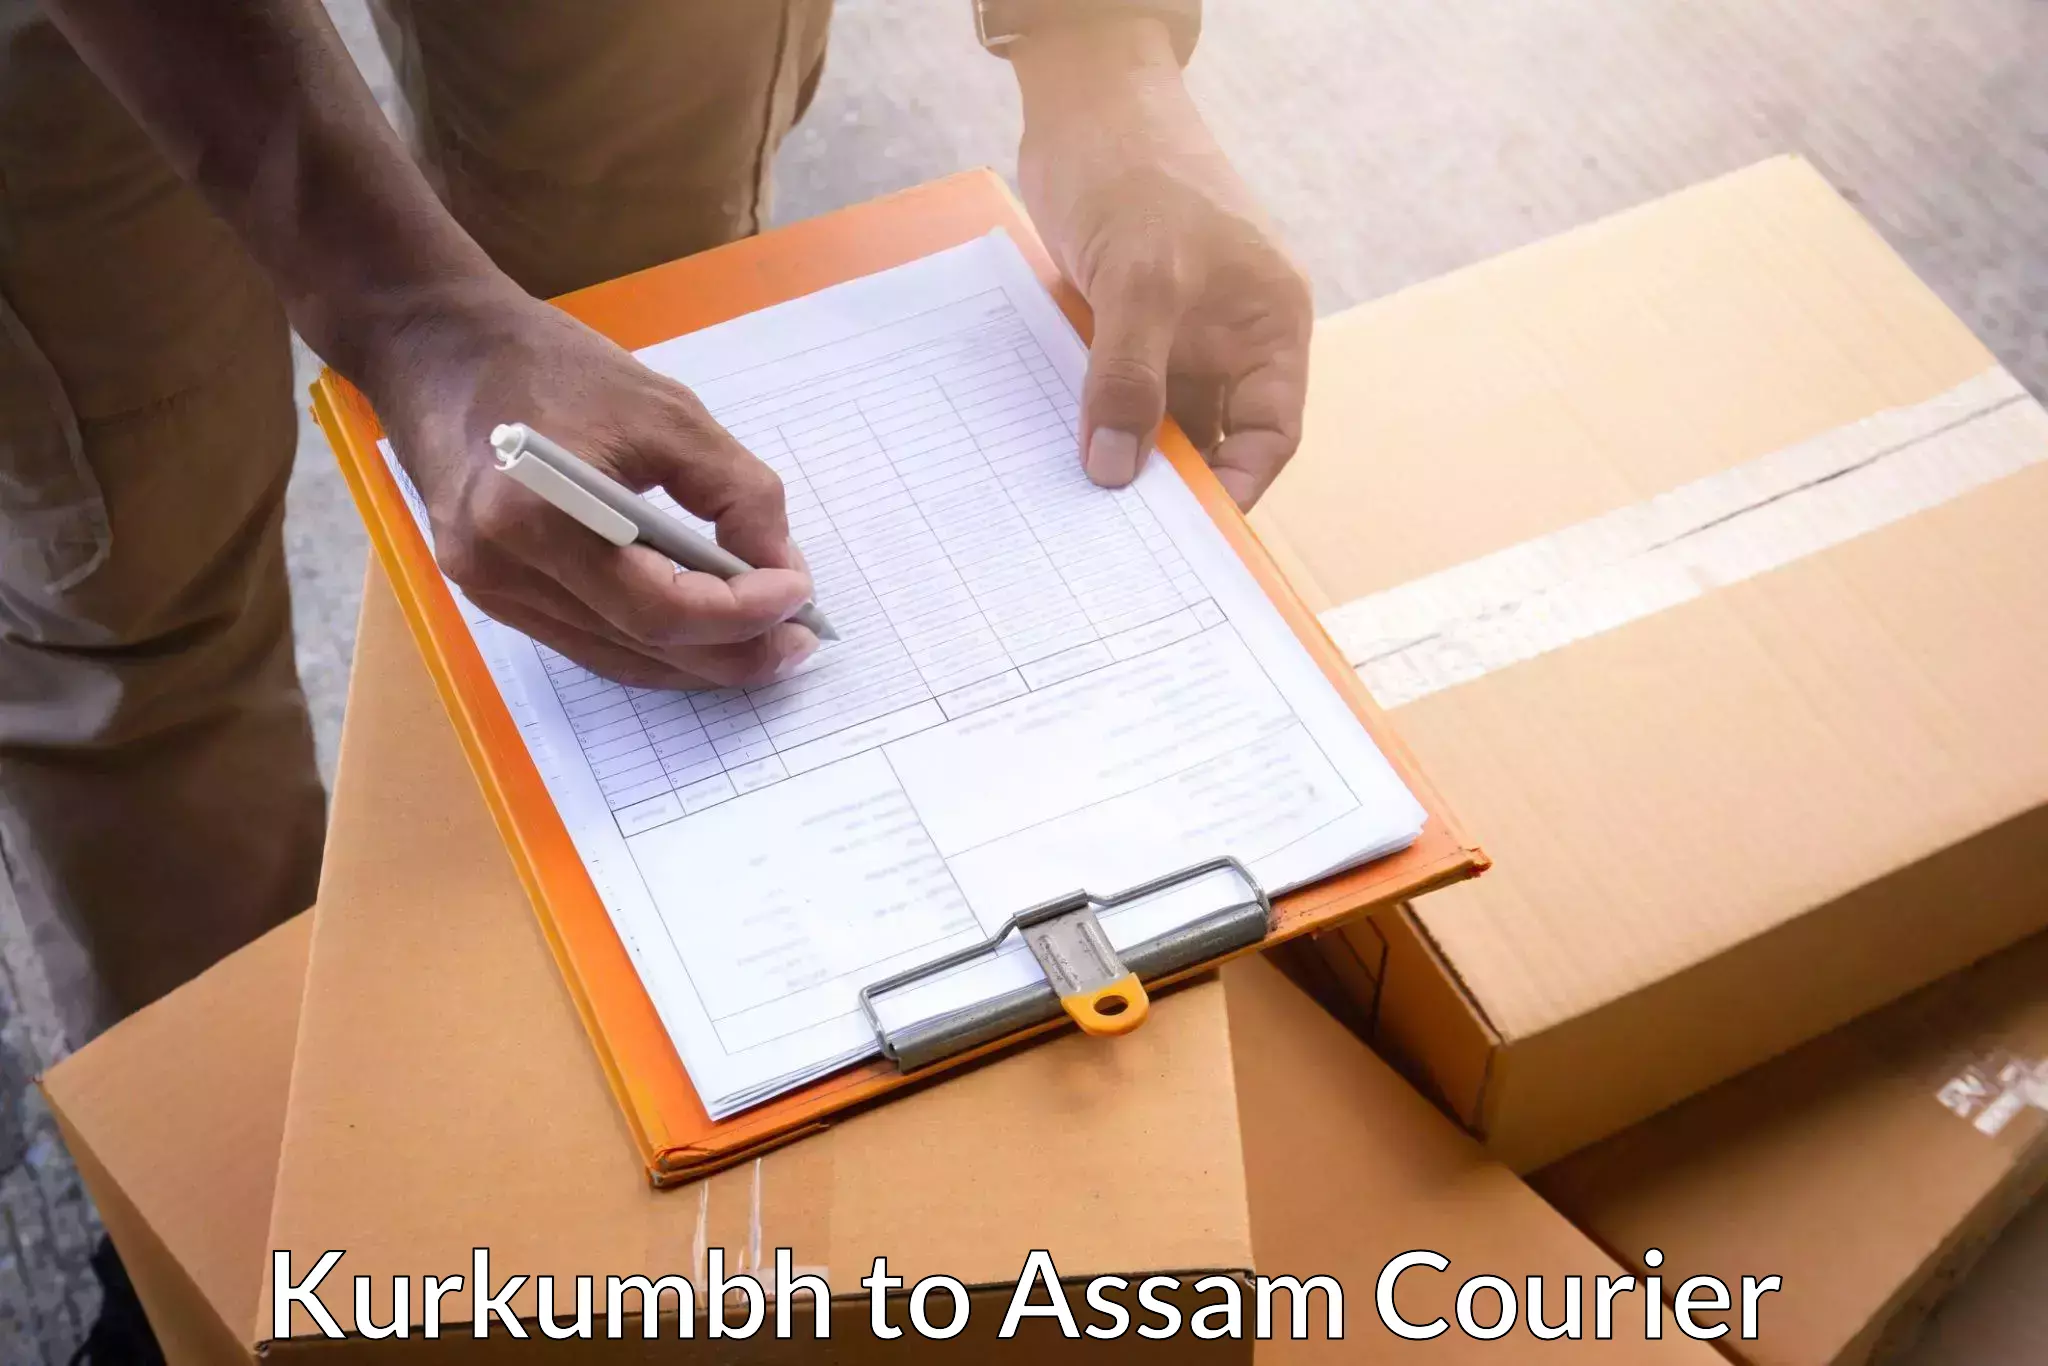 Parcel delivery automation in Kurkumbh to Lala Assam